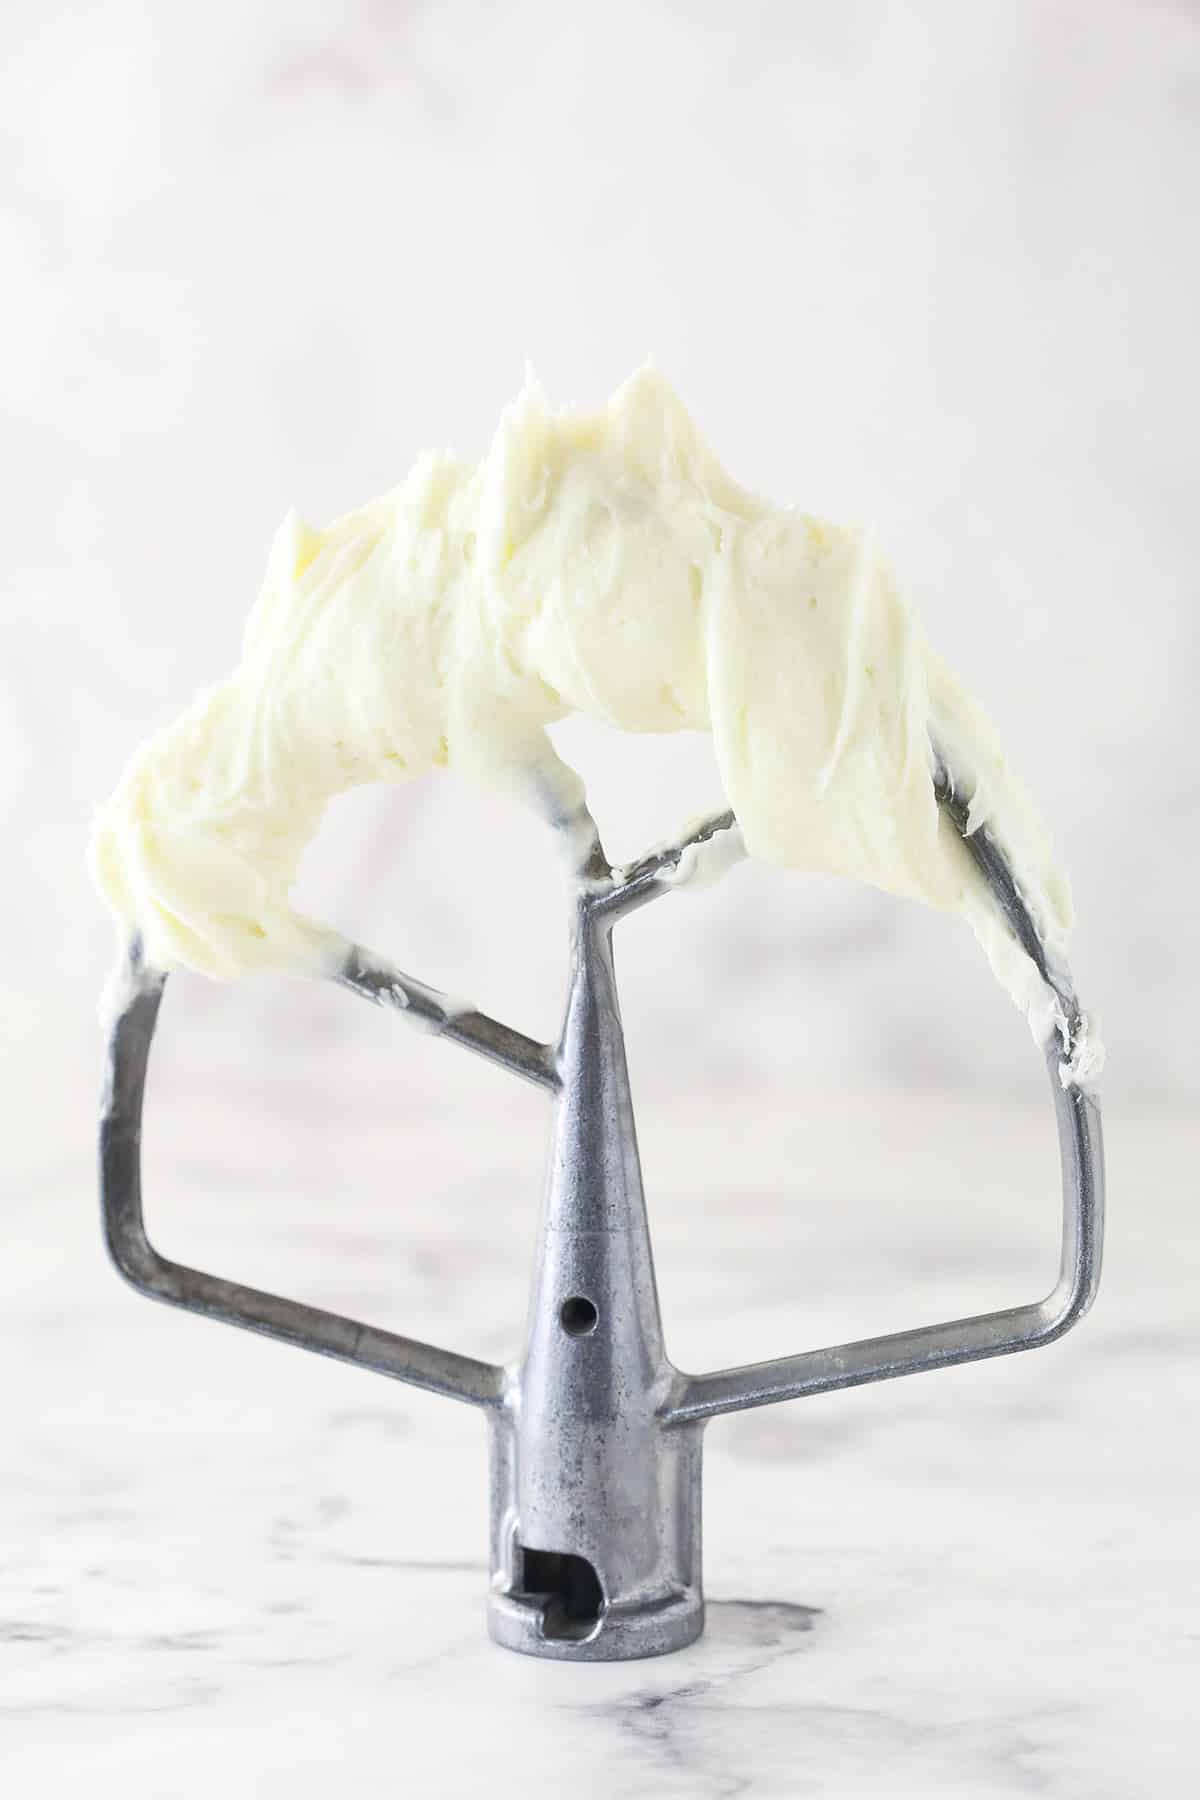 cream cheese frosting on metal mixer blade standing on marble table